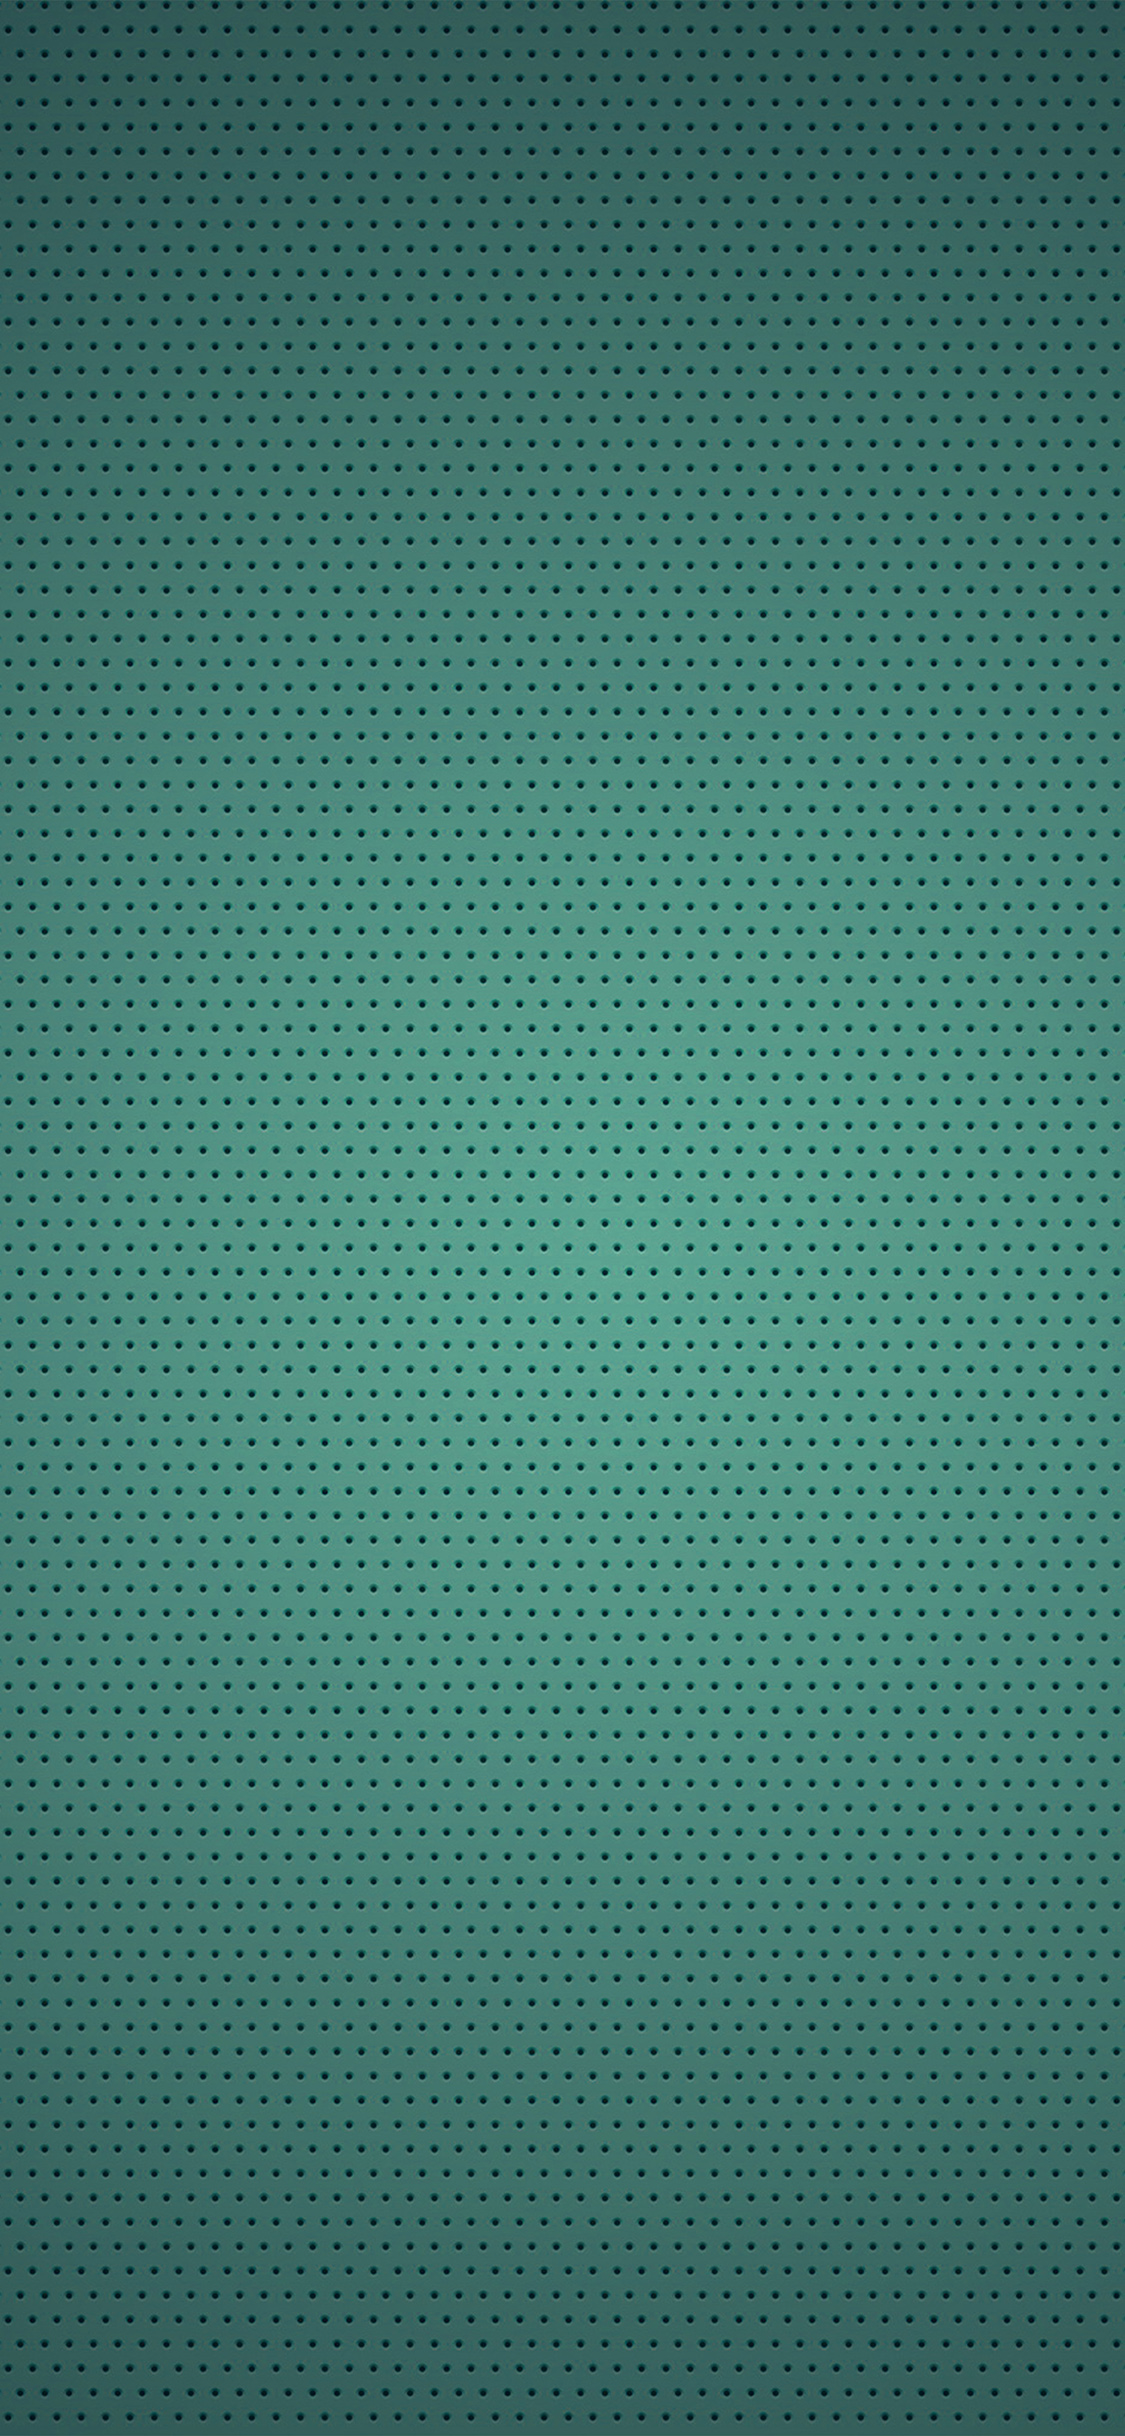 Deeply textured wallpapers for iPhone